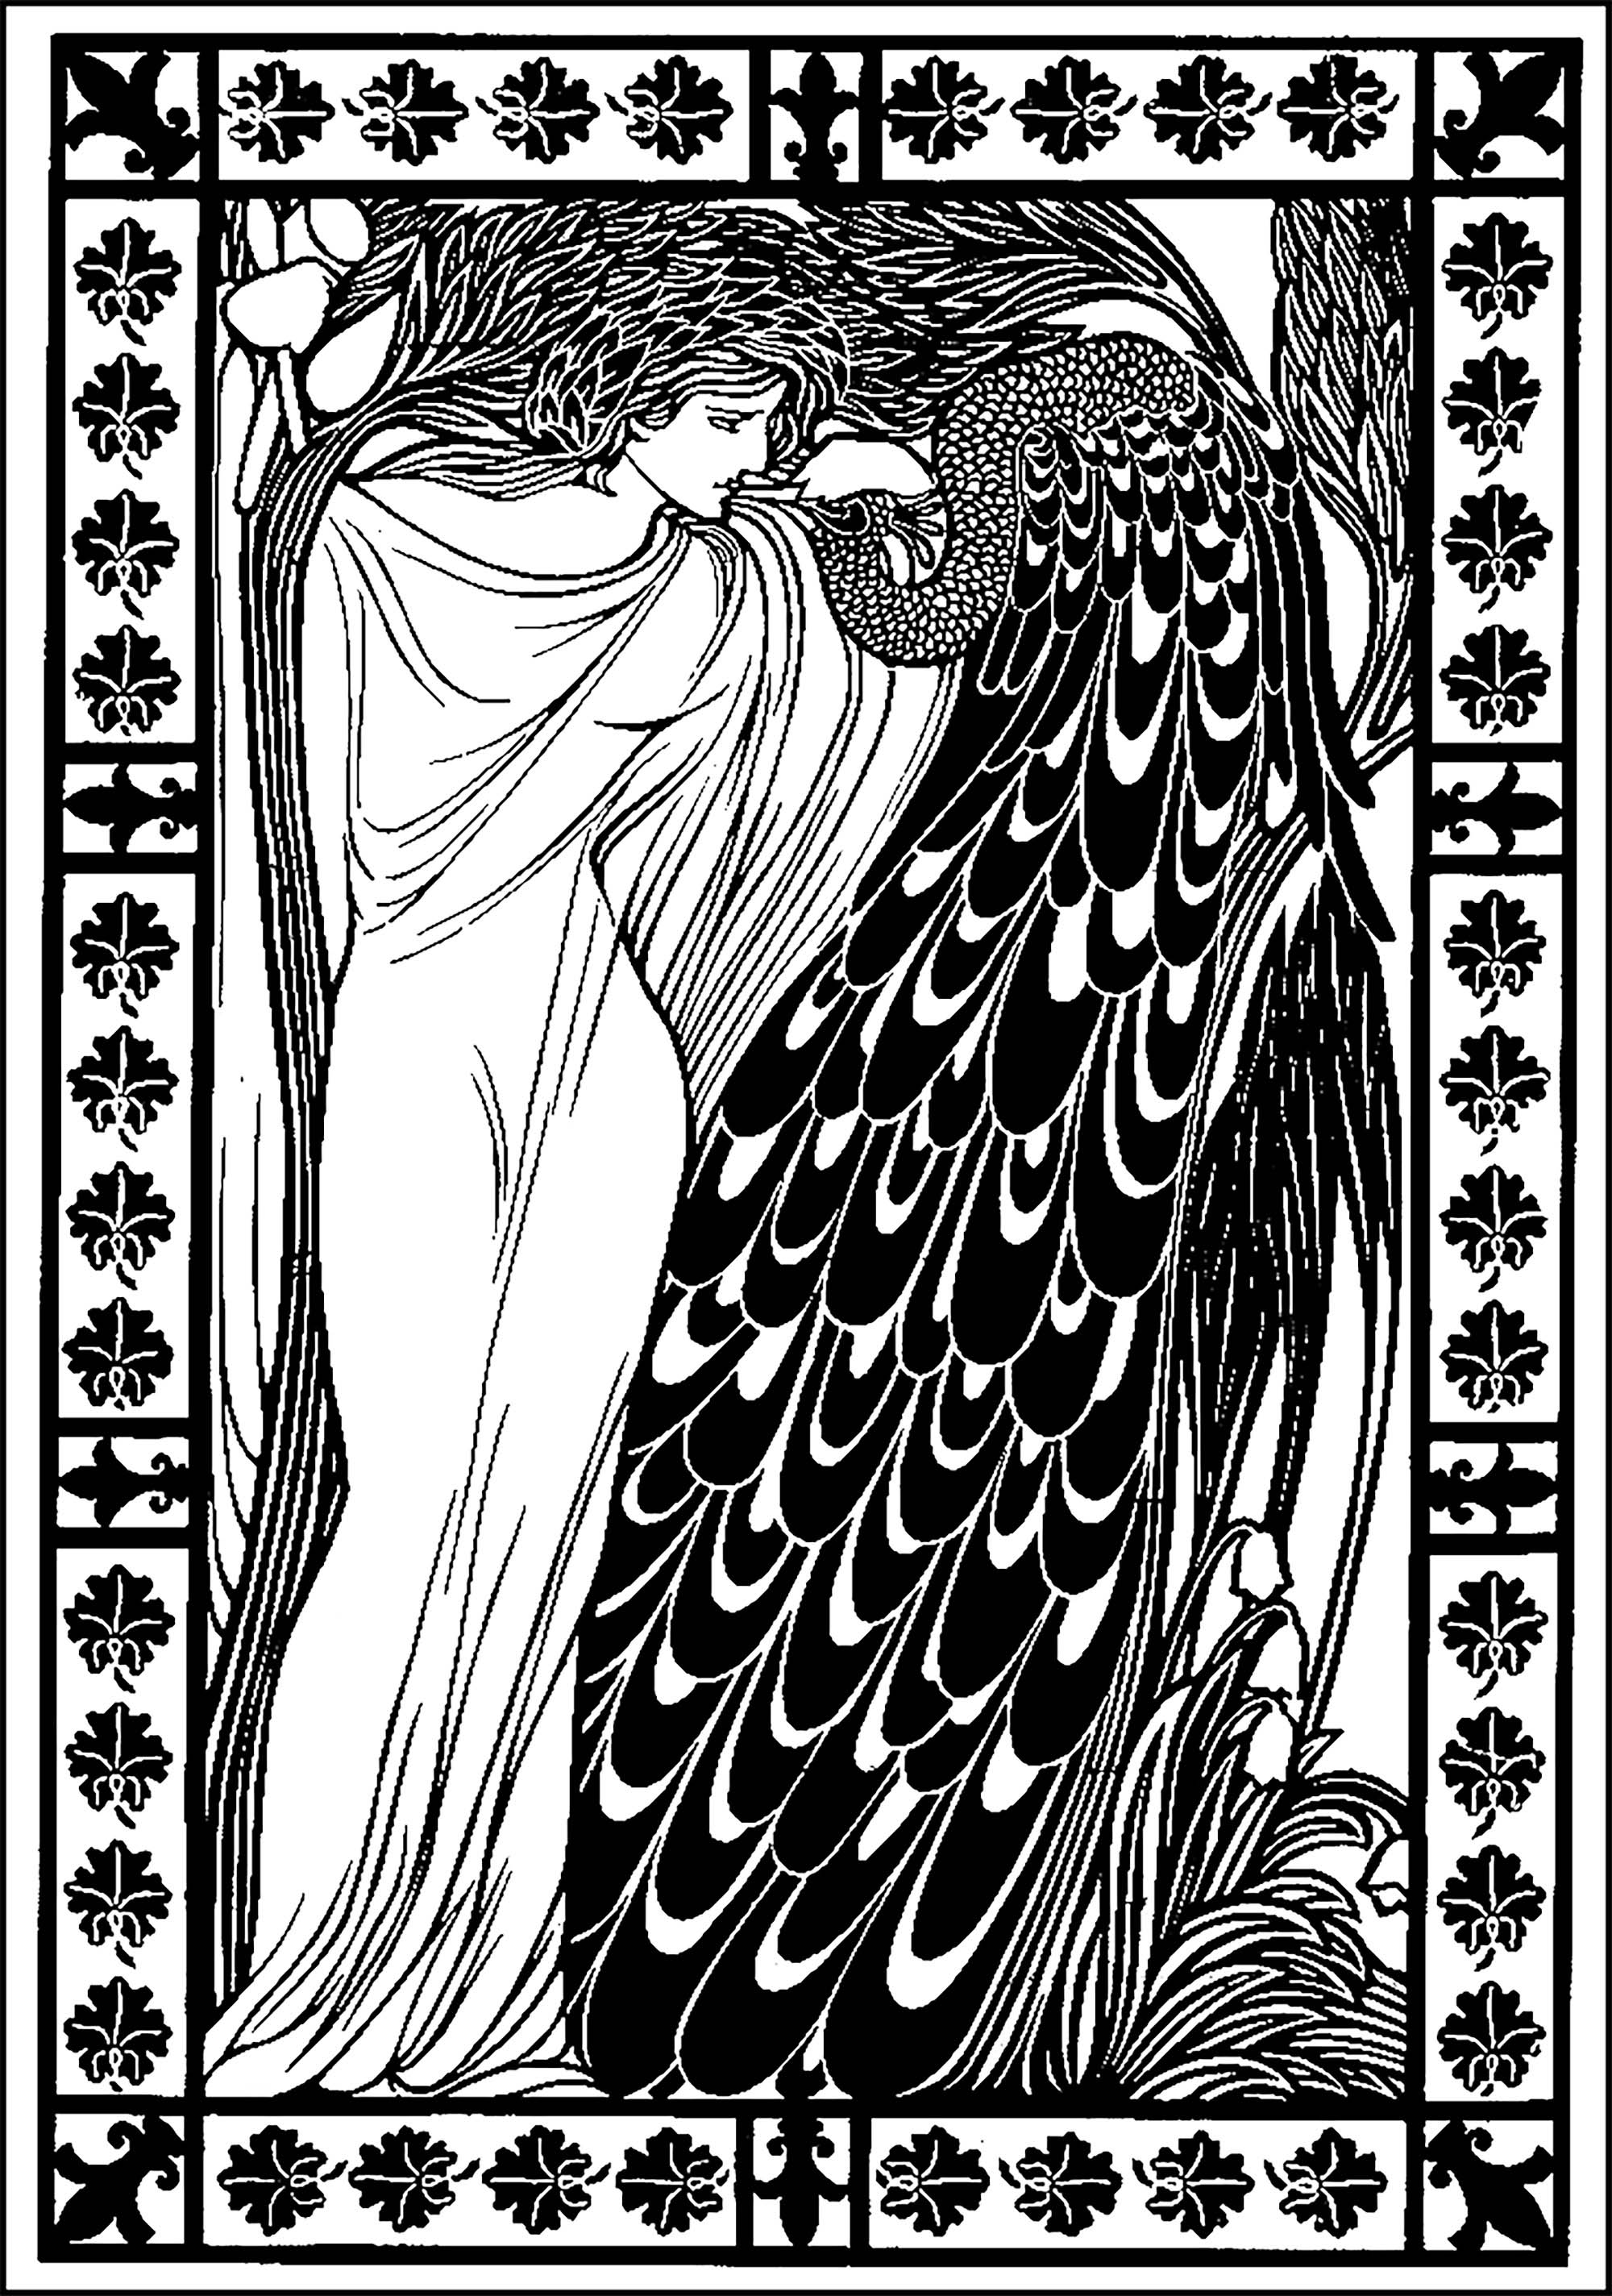 Woman and peacock : Coloring page inspired by a drawing by American artist William Bradley